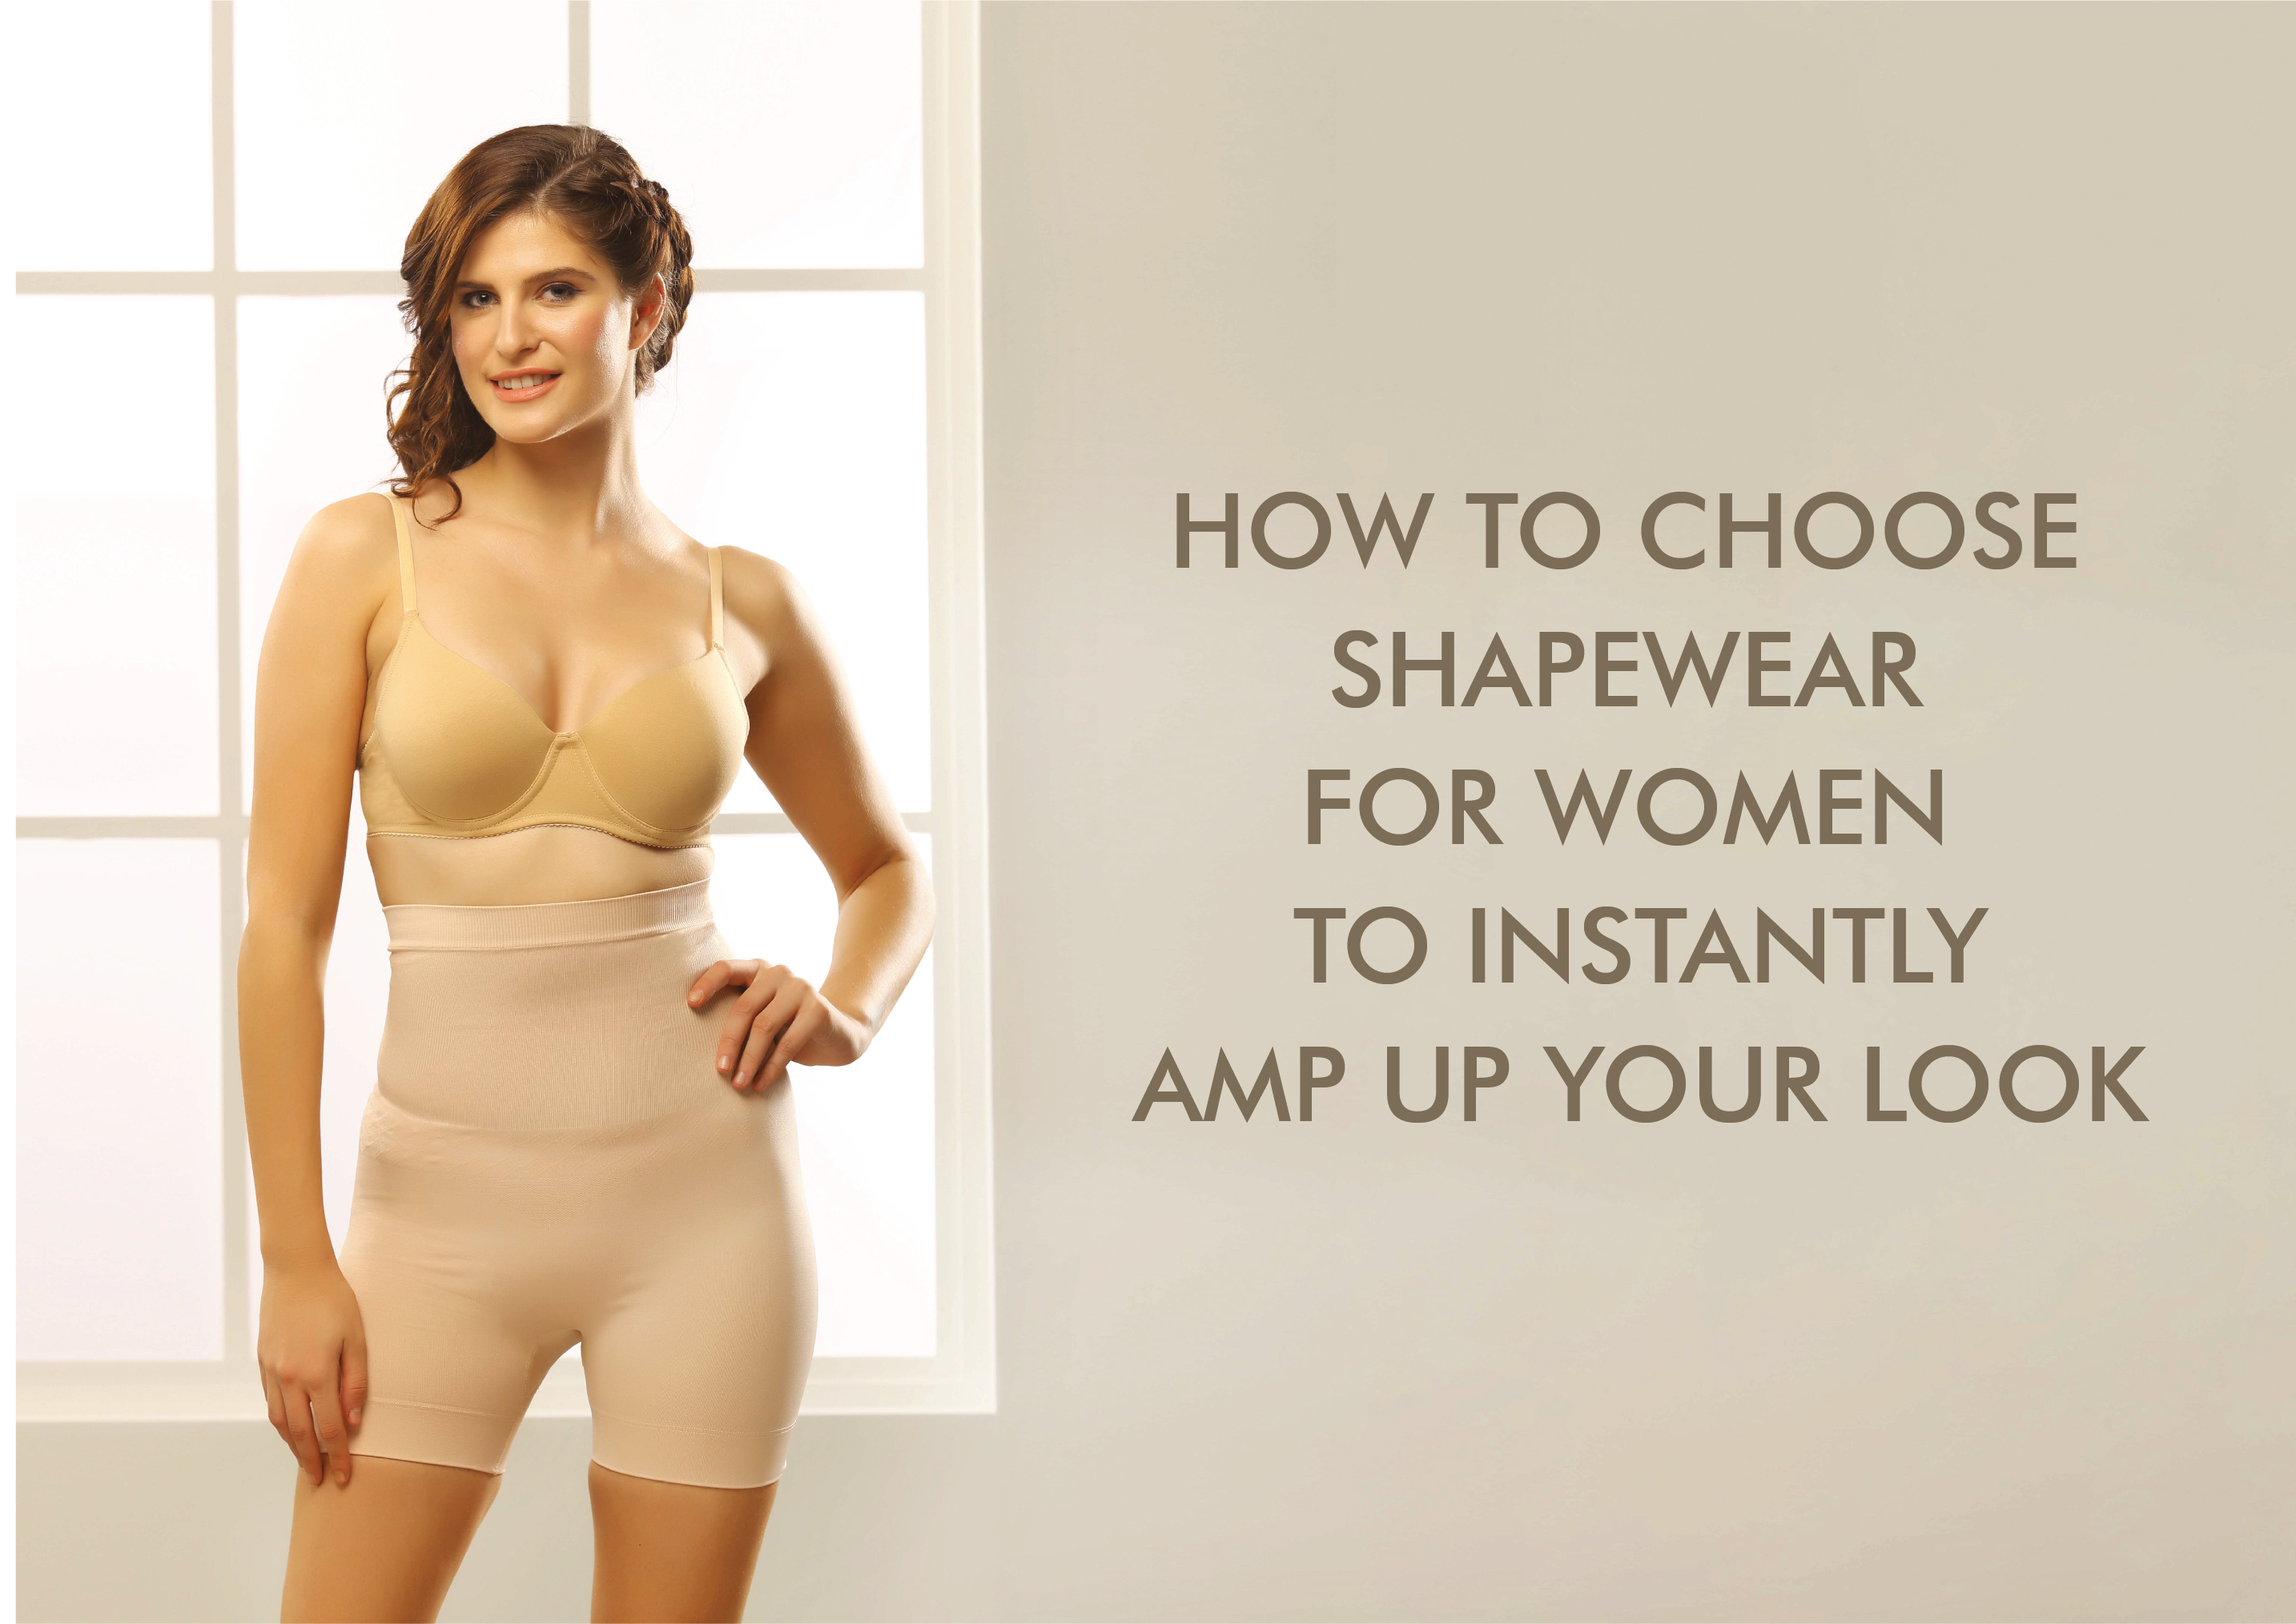 How to choose shapewear for women to instantly amp up your look